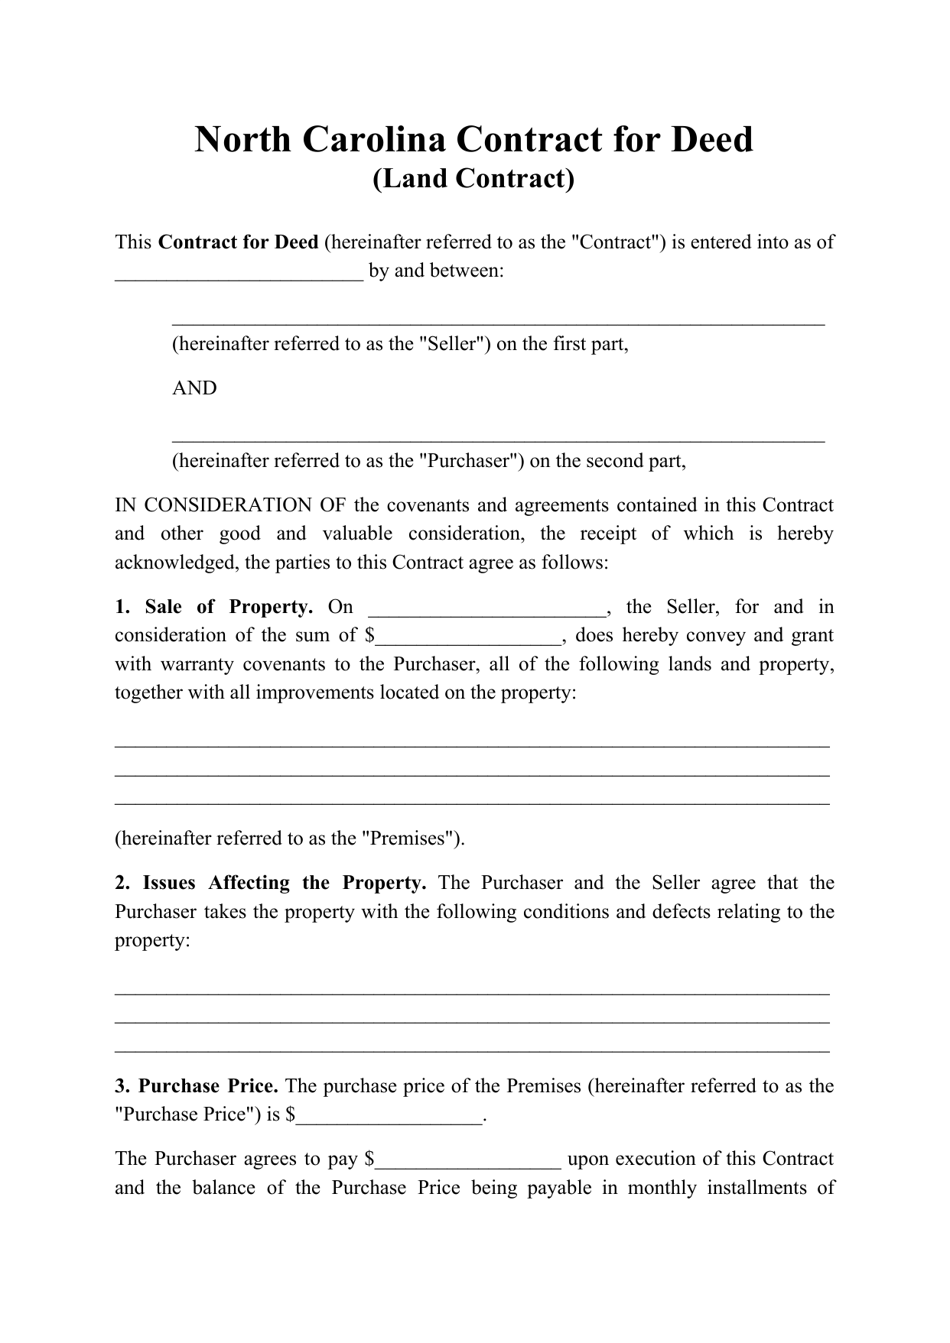 Contract for Deed (Land Contract) - North Carolina, Page 1